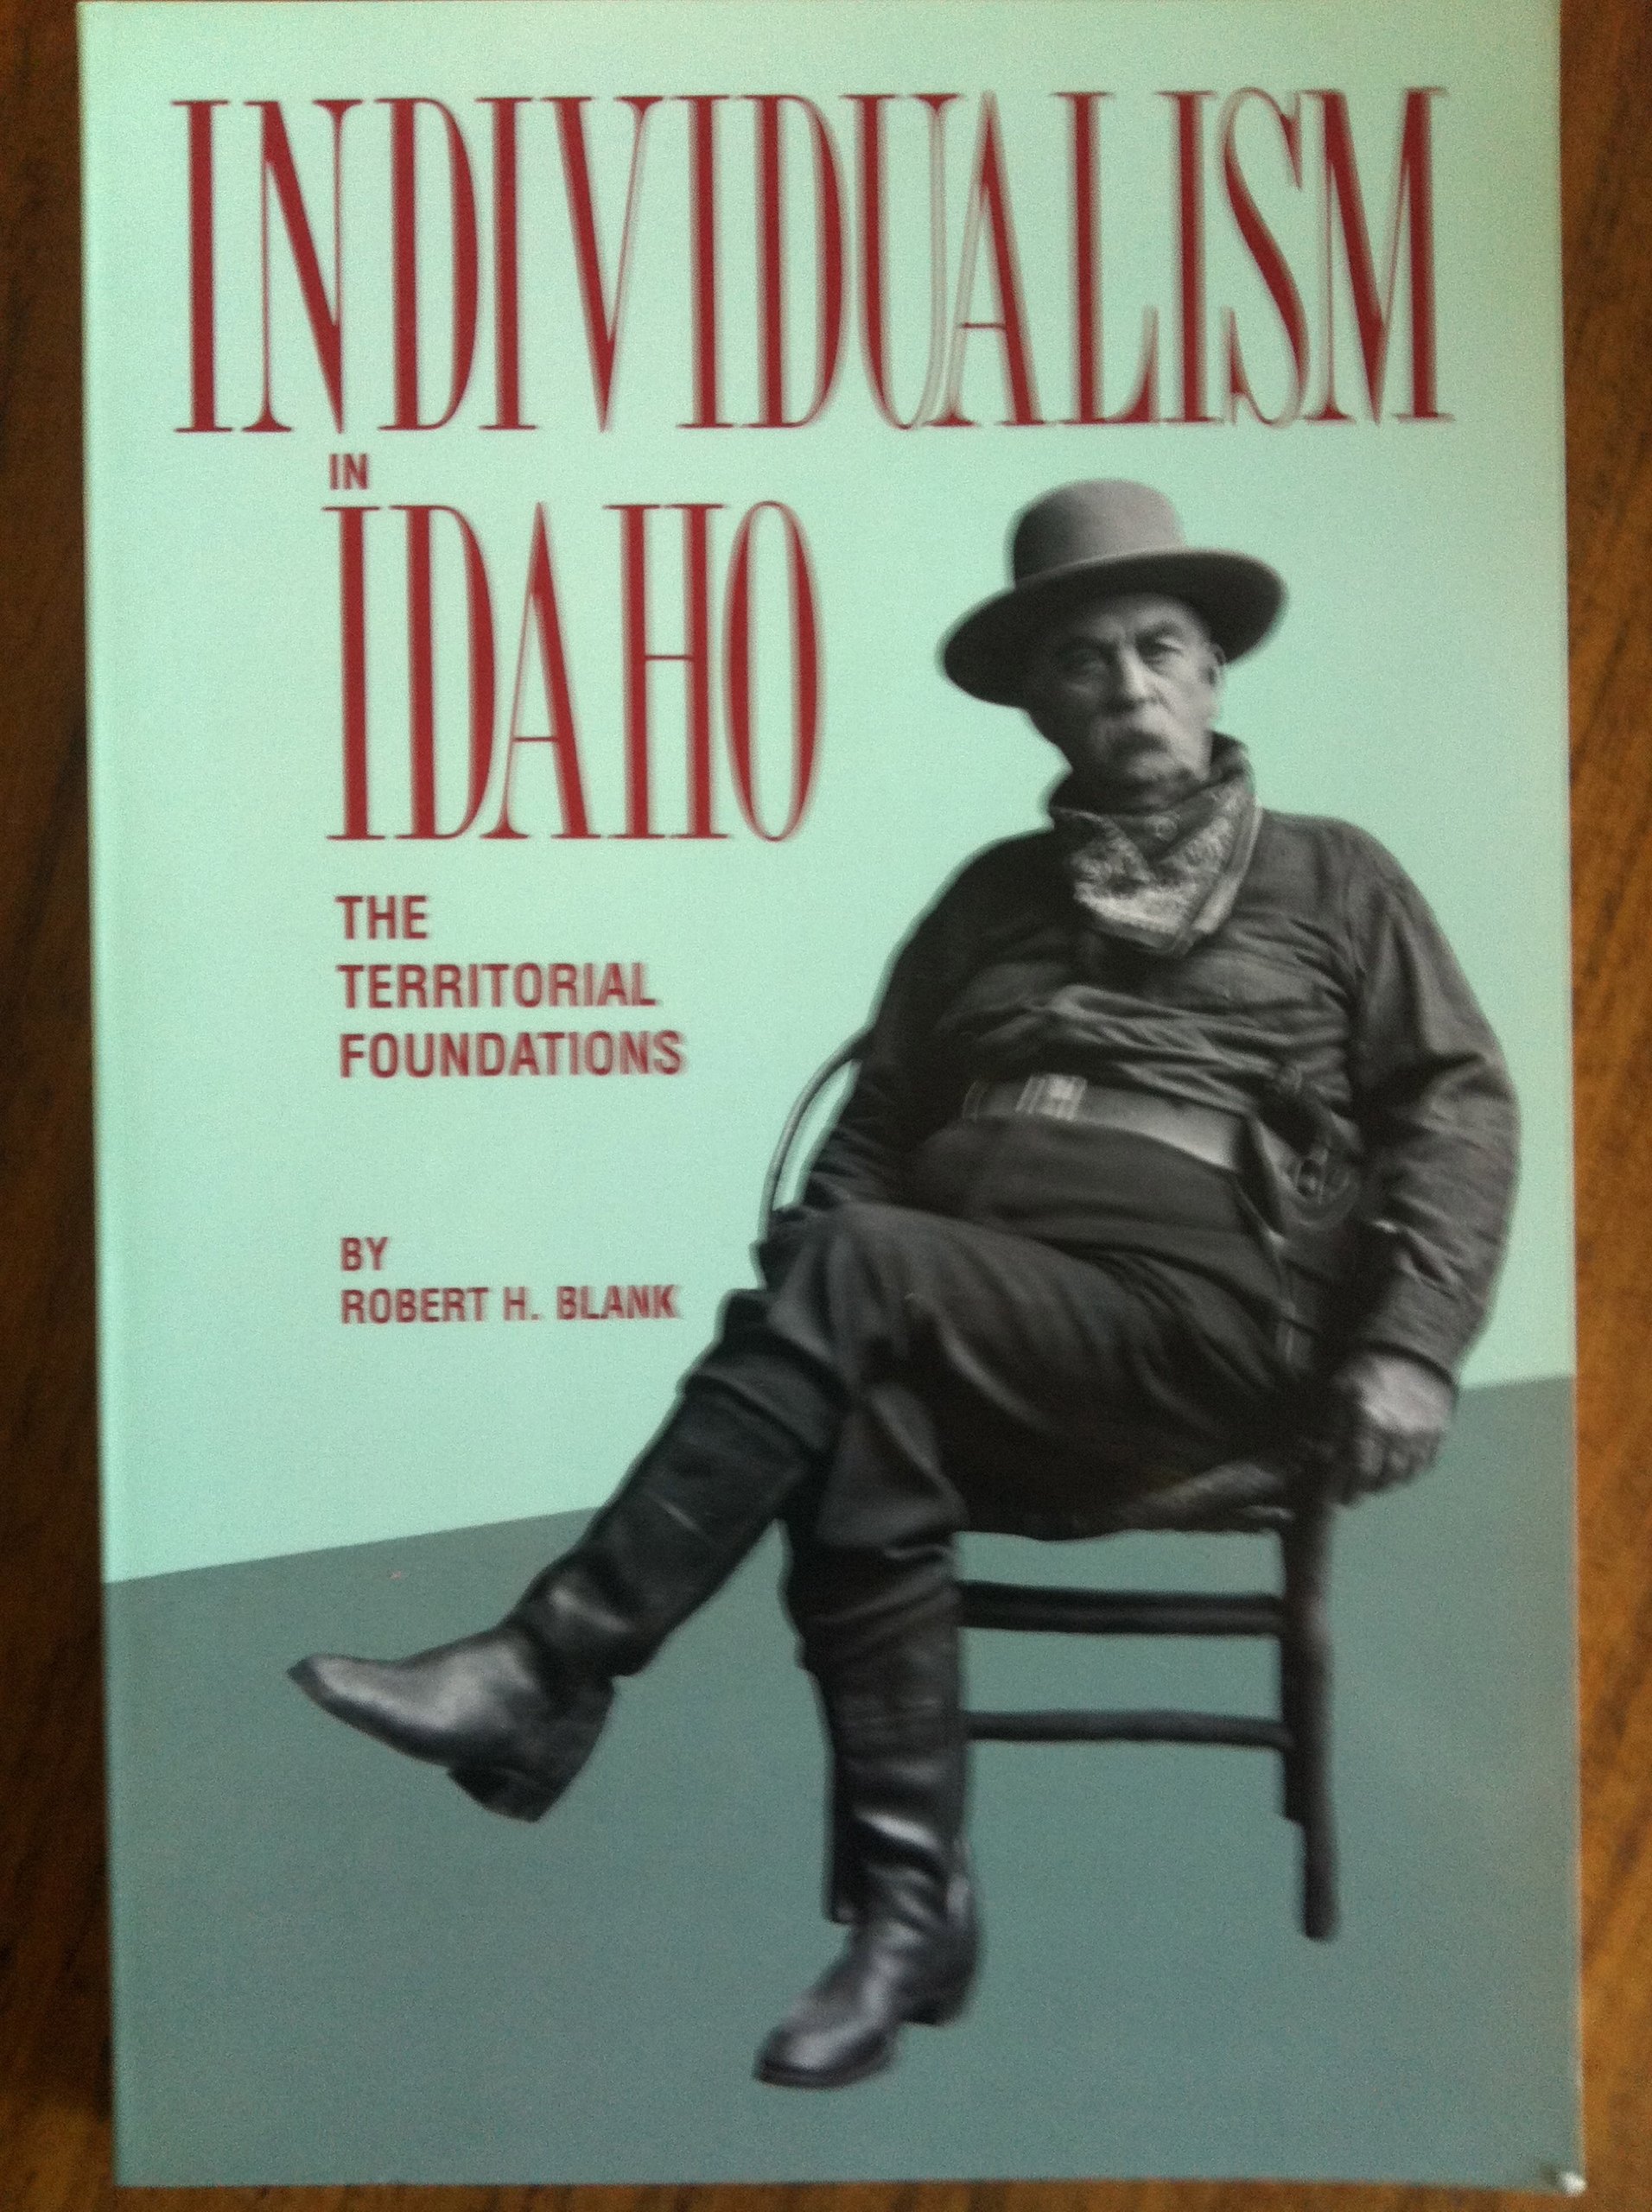 Individualism in Idaho: The territorial foundations (book cover)